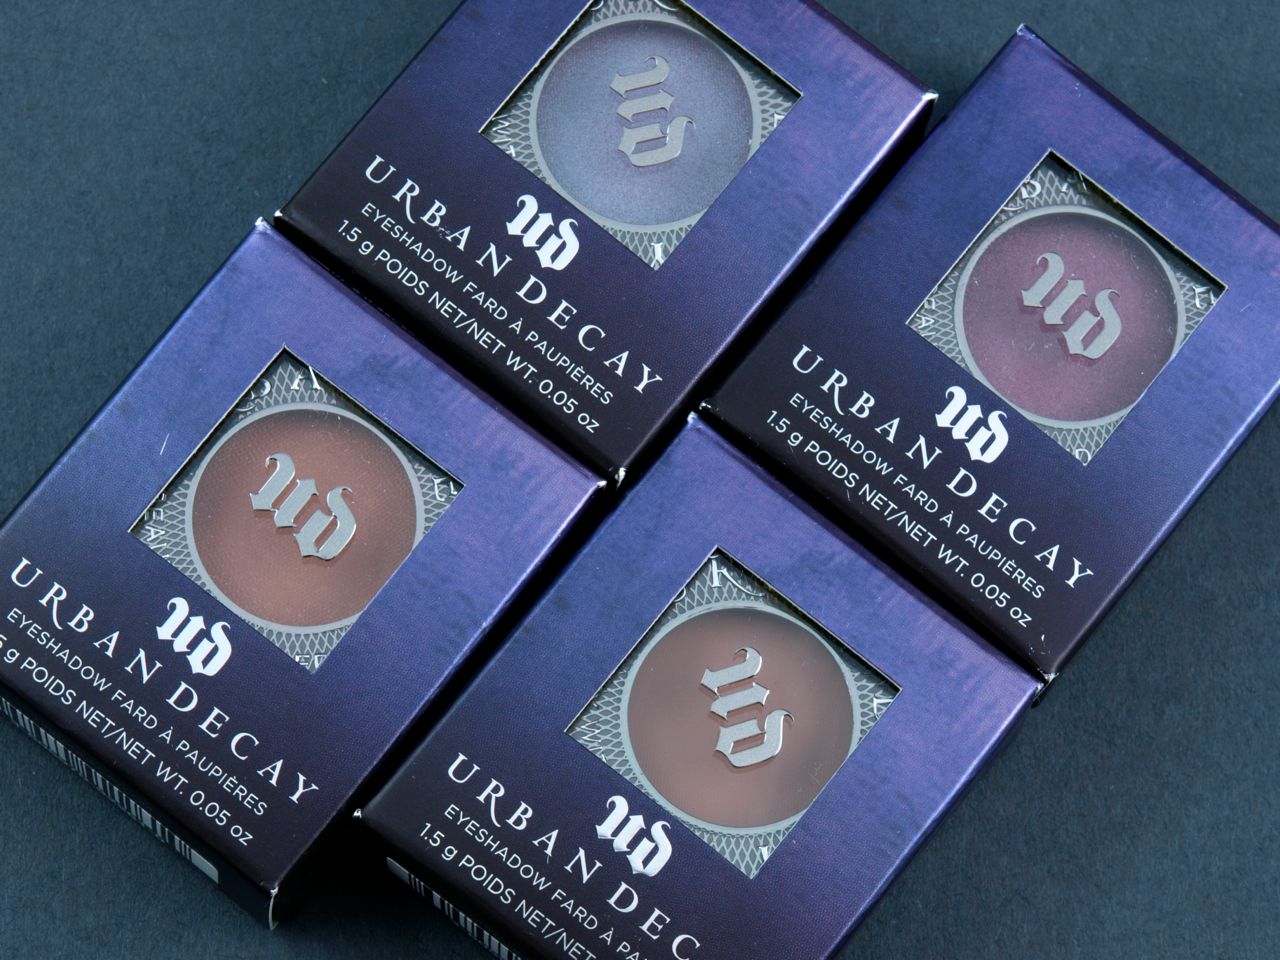 Urban Decay Summer 2015 New Single Eyeshadow Shades: Review and Swatches.